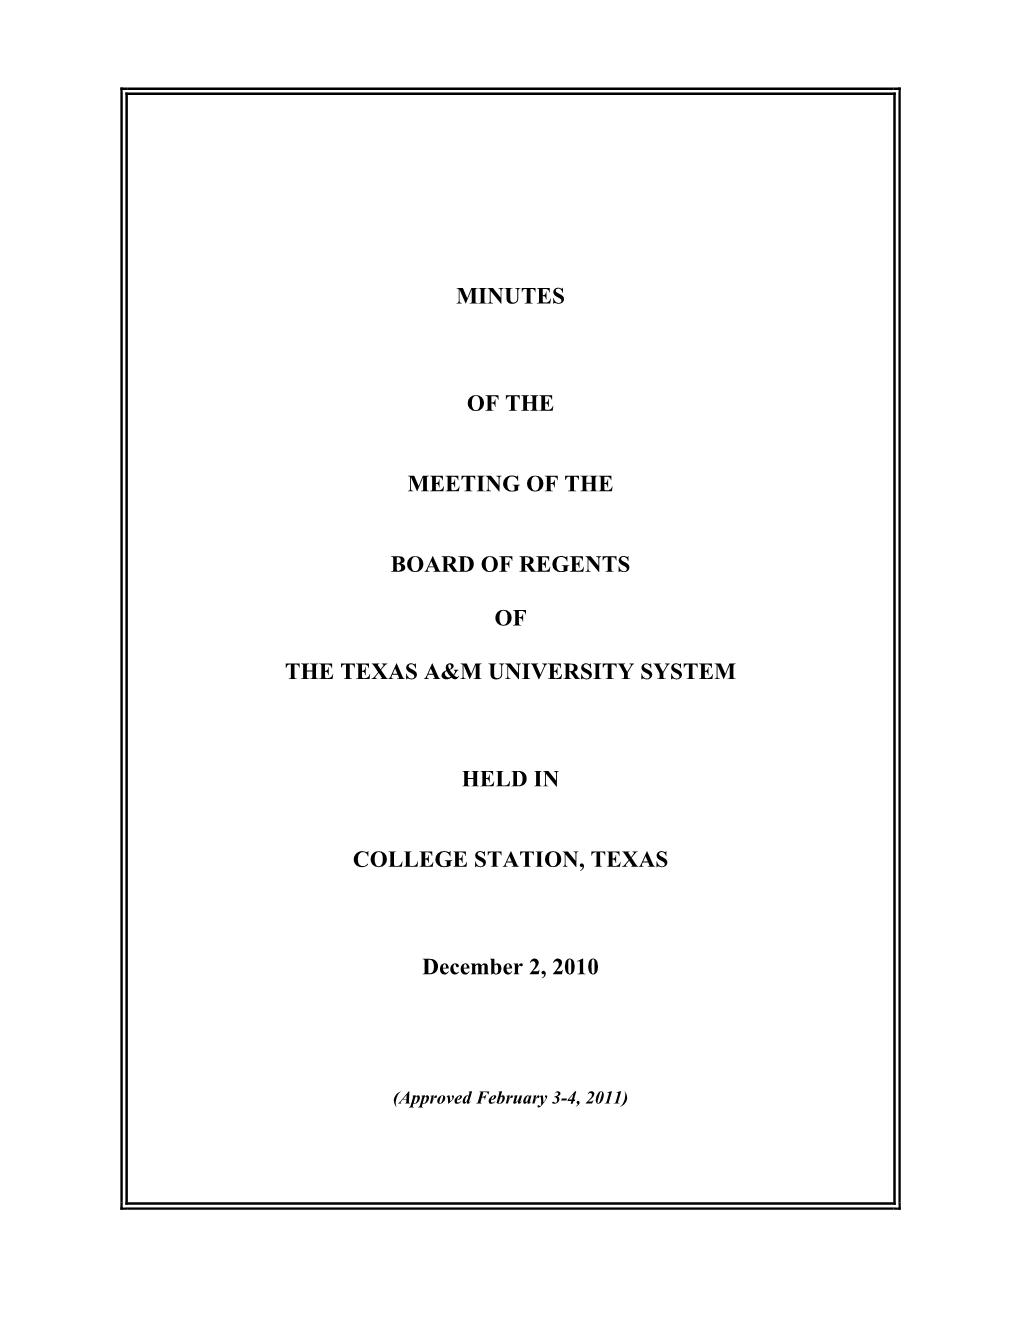 TABLE of CONTENTS MINUTES of the MEETING of the BOARD of REGENTS December 2, 2010